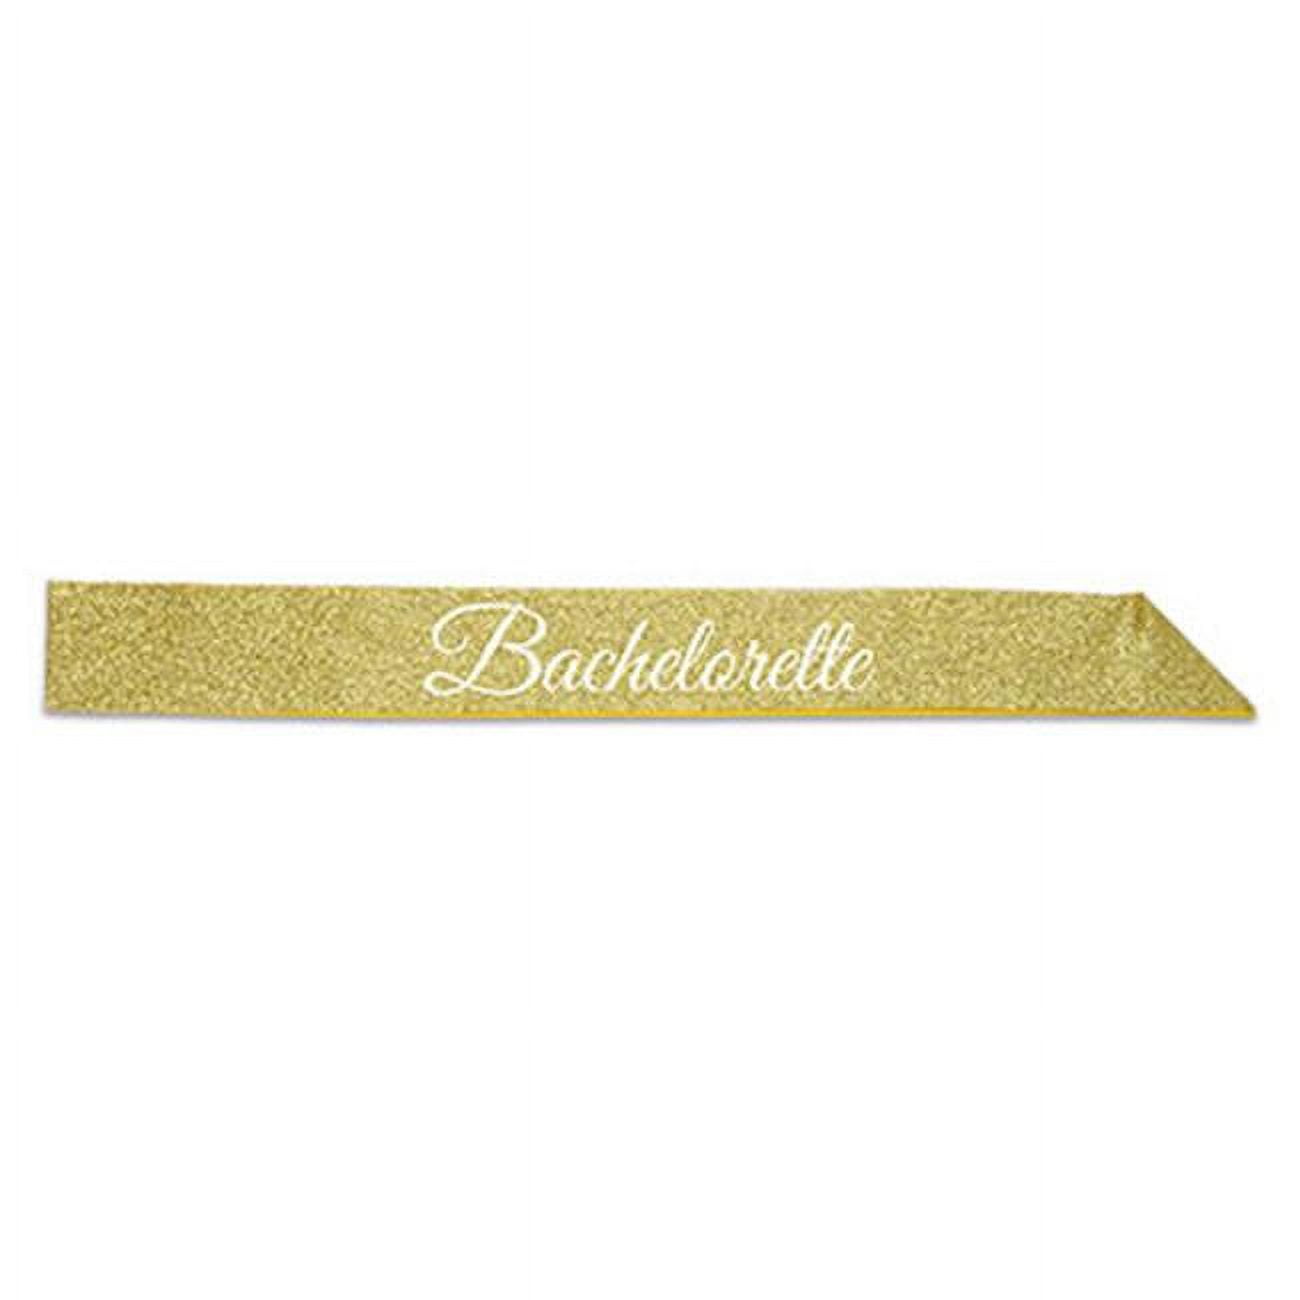 Picture of Beistle 66022 32.5 x 3.5 in. Bachelorette Glittered Sash - Pack of 6